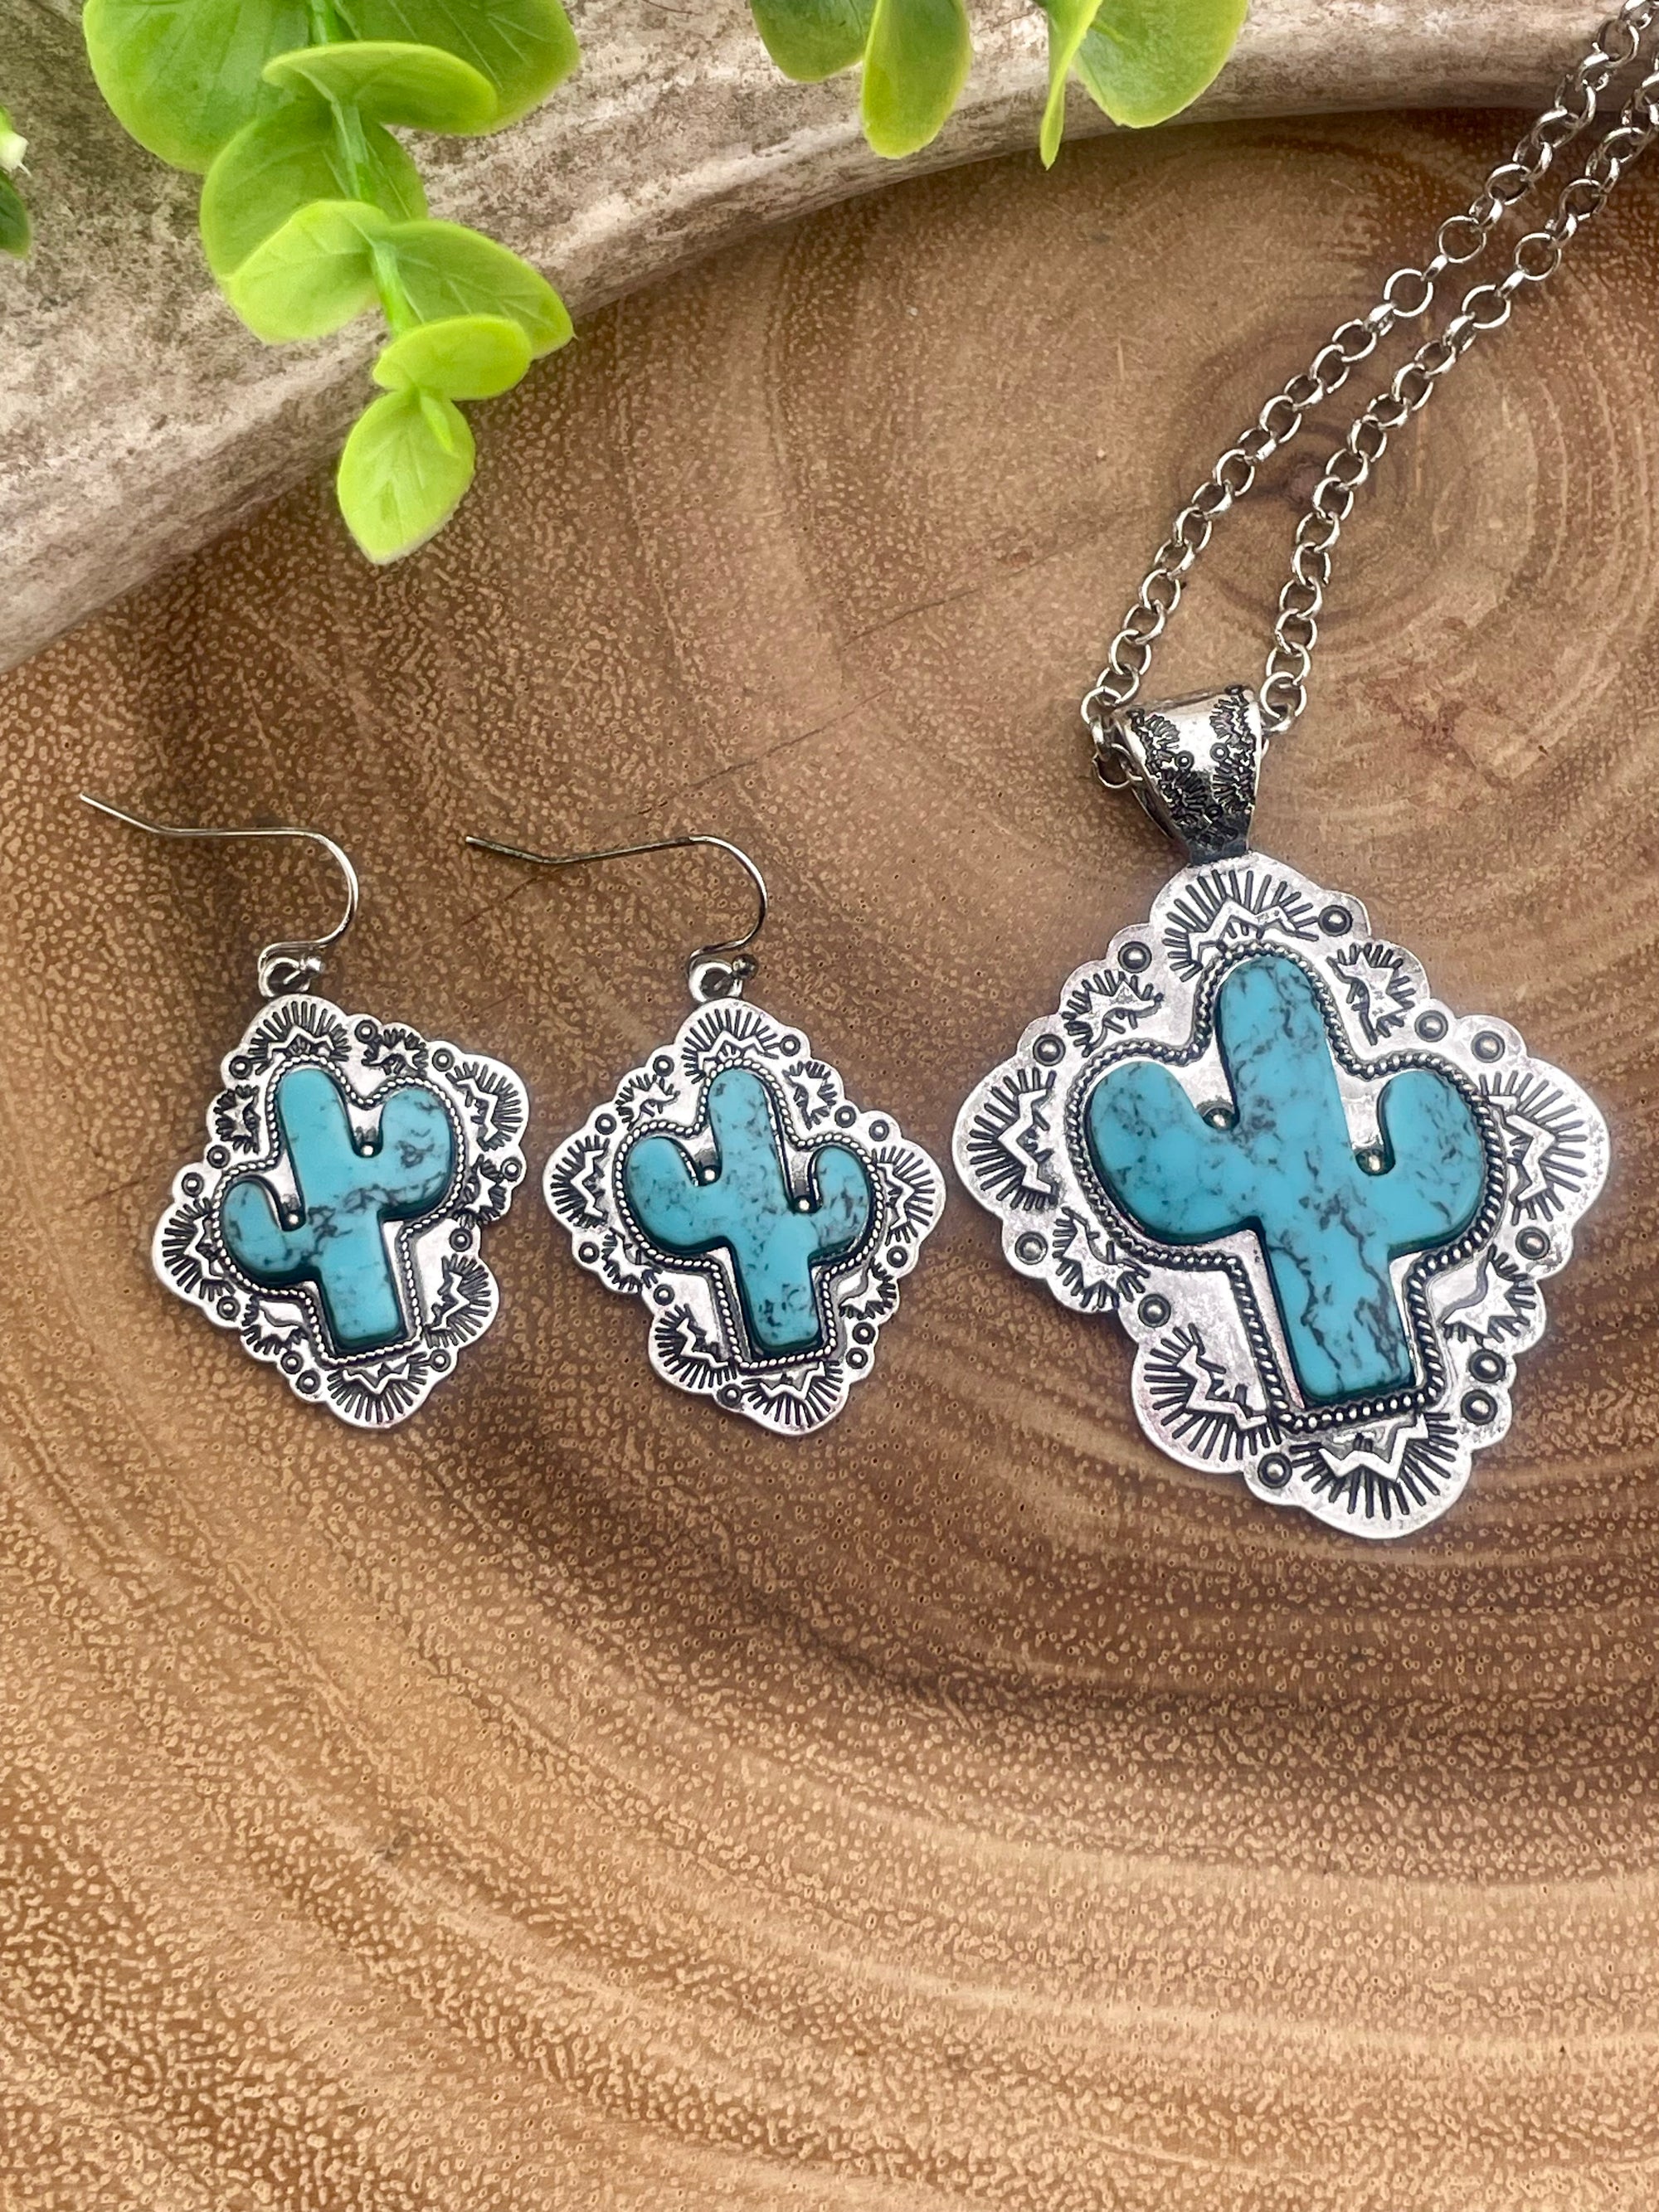 Dusty Framed Stone Cactus Necklace & Earrings - Turquoise